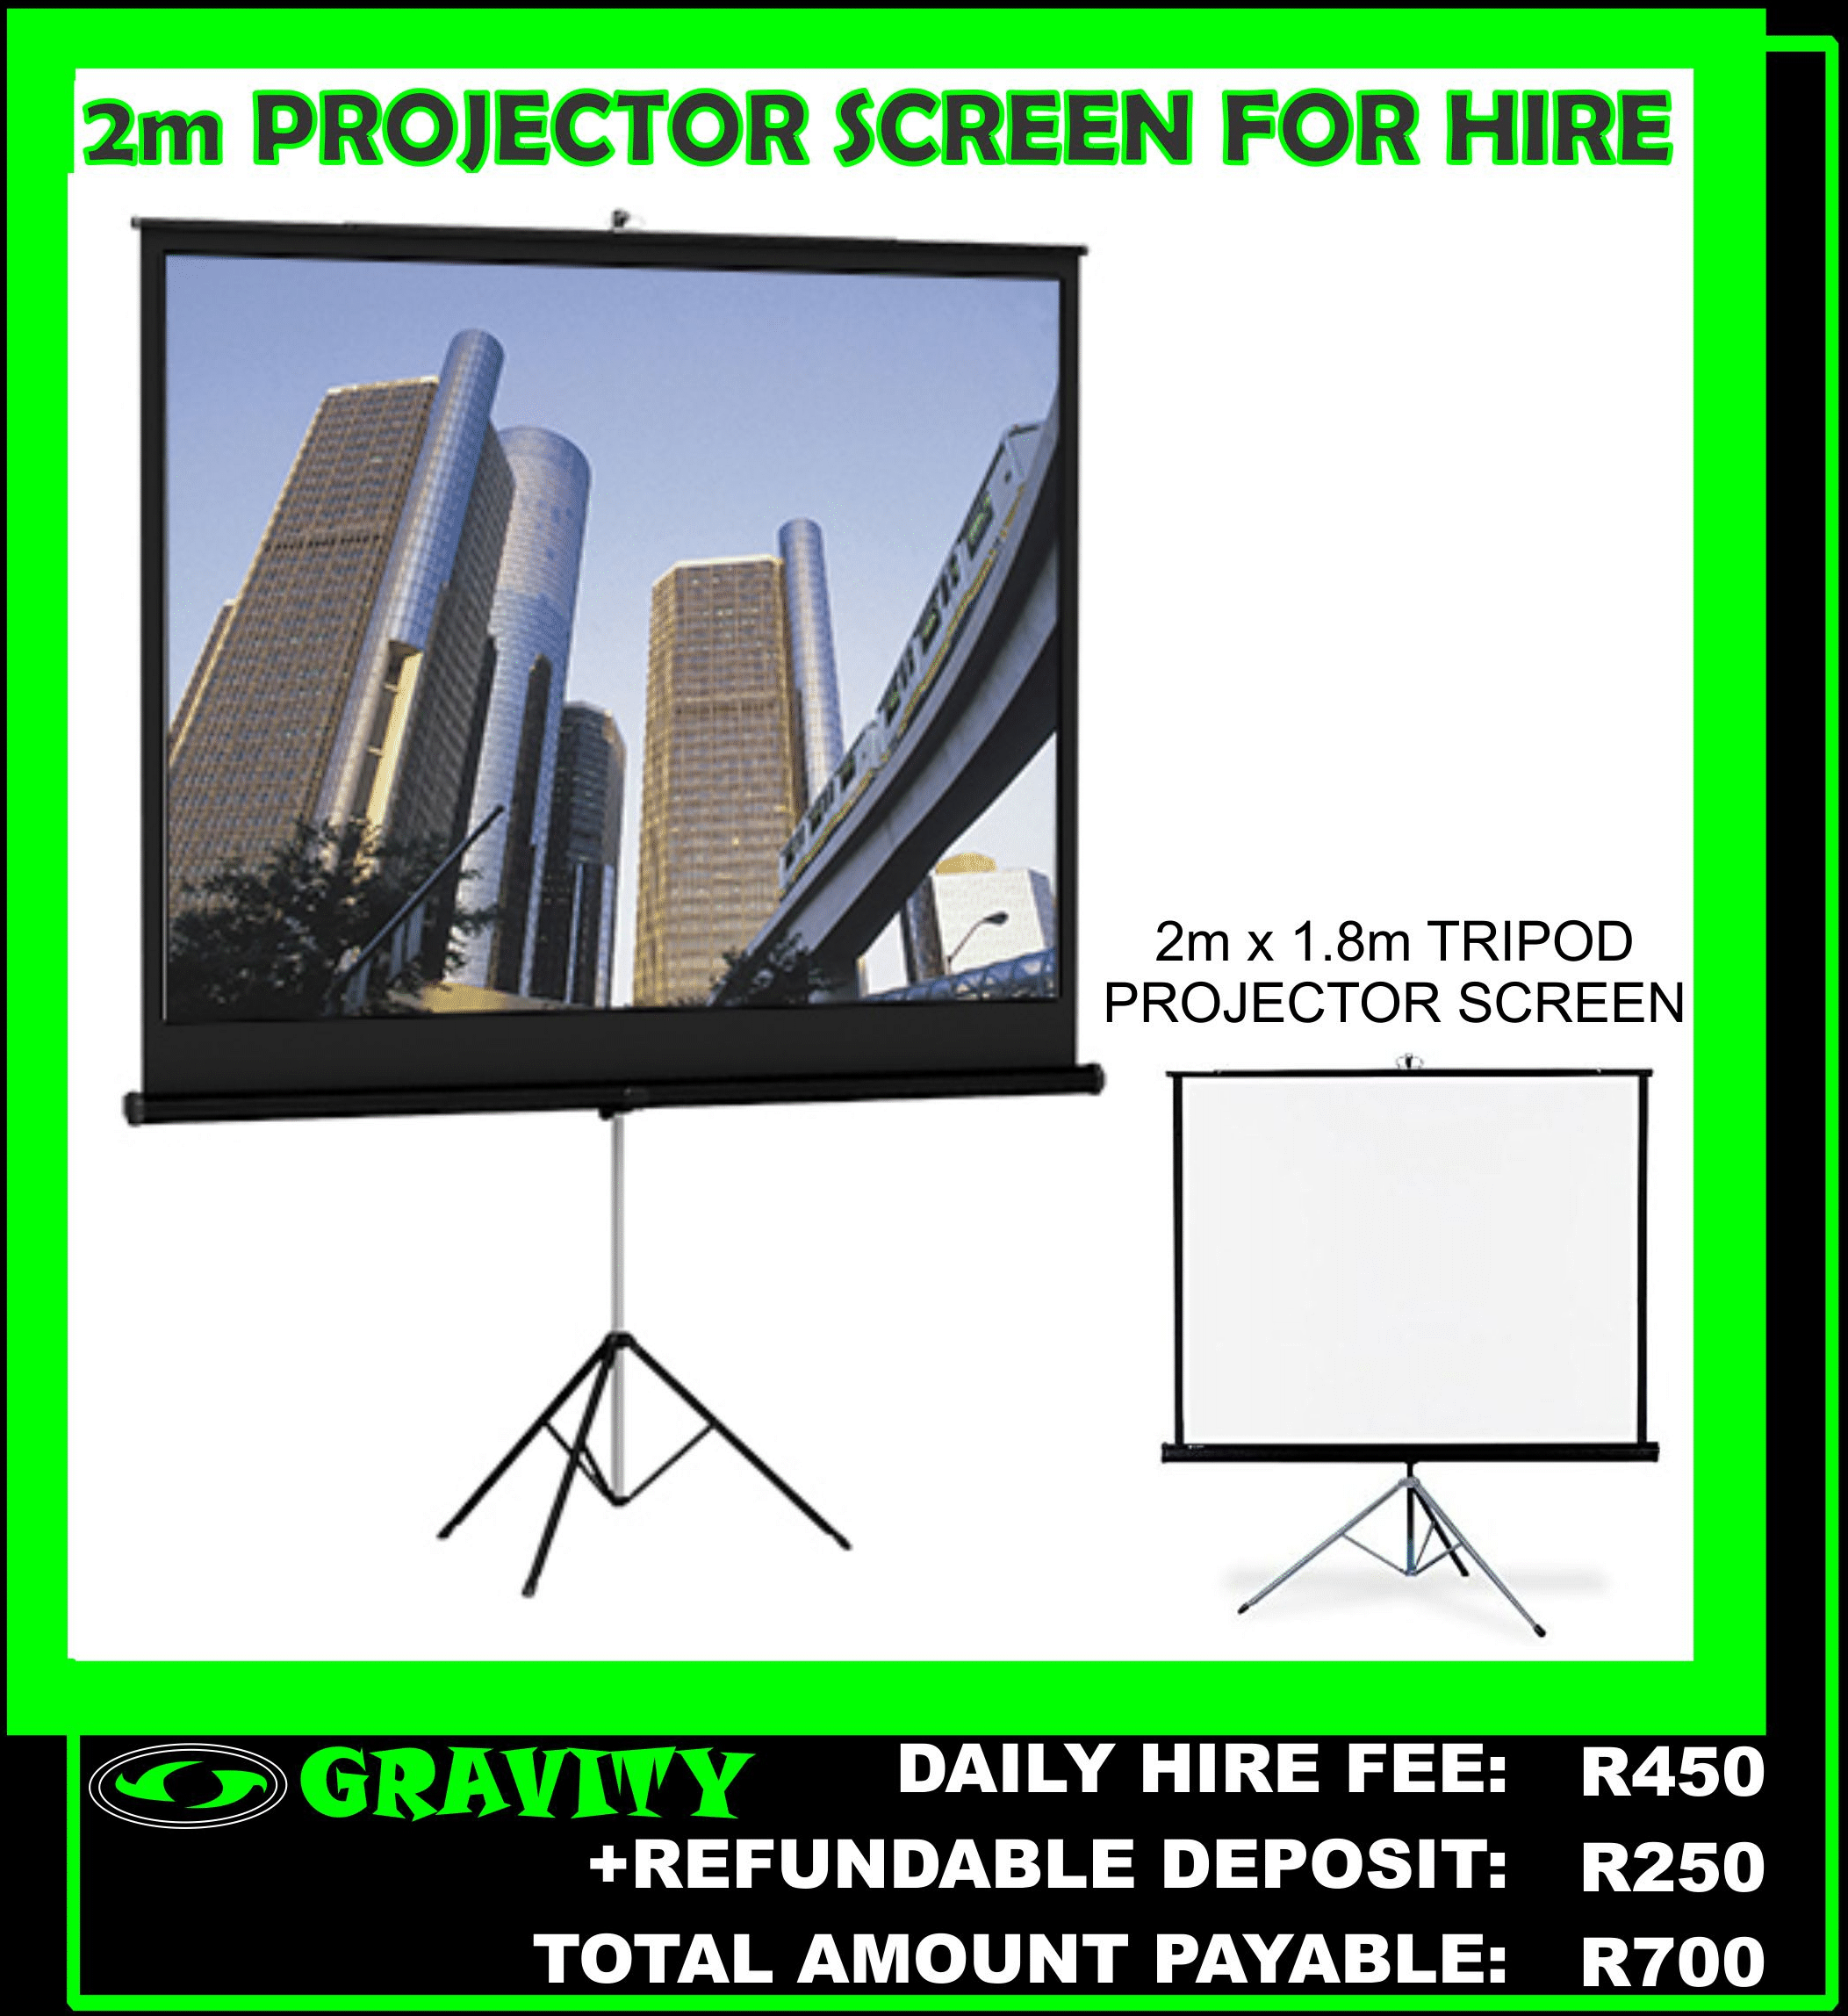 2m PROJECTOR SCREEN FOR HIRE IN DURBAN AREA NOW AVAILABLE ON DAILY HIRE AT GRAVITY SOUND AND LIGHTING WAREHOUSE DURBAN PHOENIX 0315072463  OR 0315072736  DAILY HIRE FEE: R350  2m TRIPOD PROJECTOR SCREEN ONLY     DOCUMENTS REQUIRED WHEN HIRING EQUIPMENT:  *COPY OF ID DOCUMENT (original SA id)  *CAR REGISTRATION NUMBER  *PROOF OF RESIDENCE (not older than 3months)